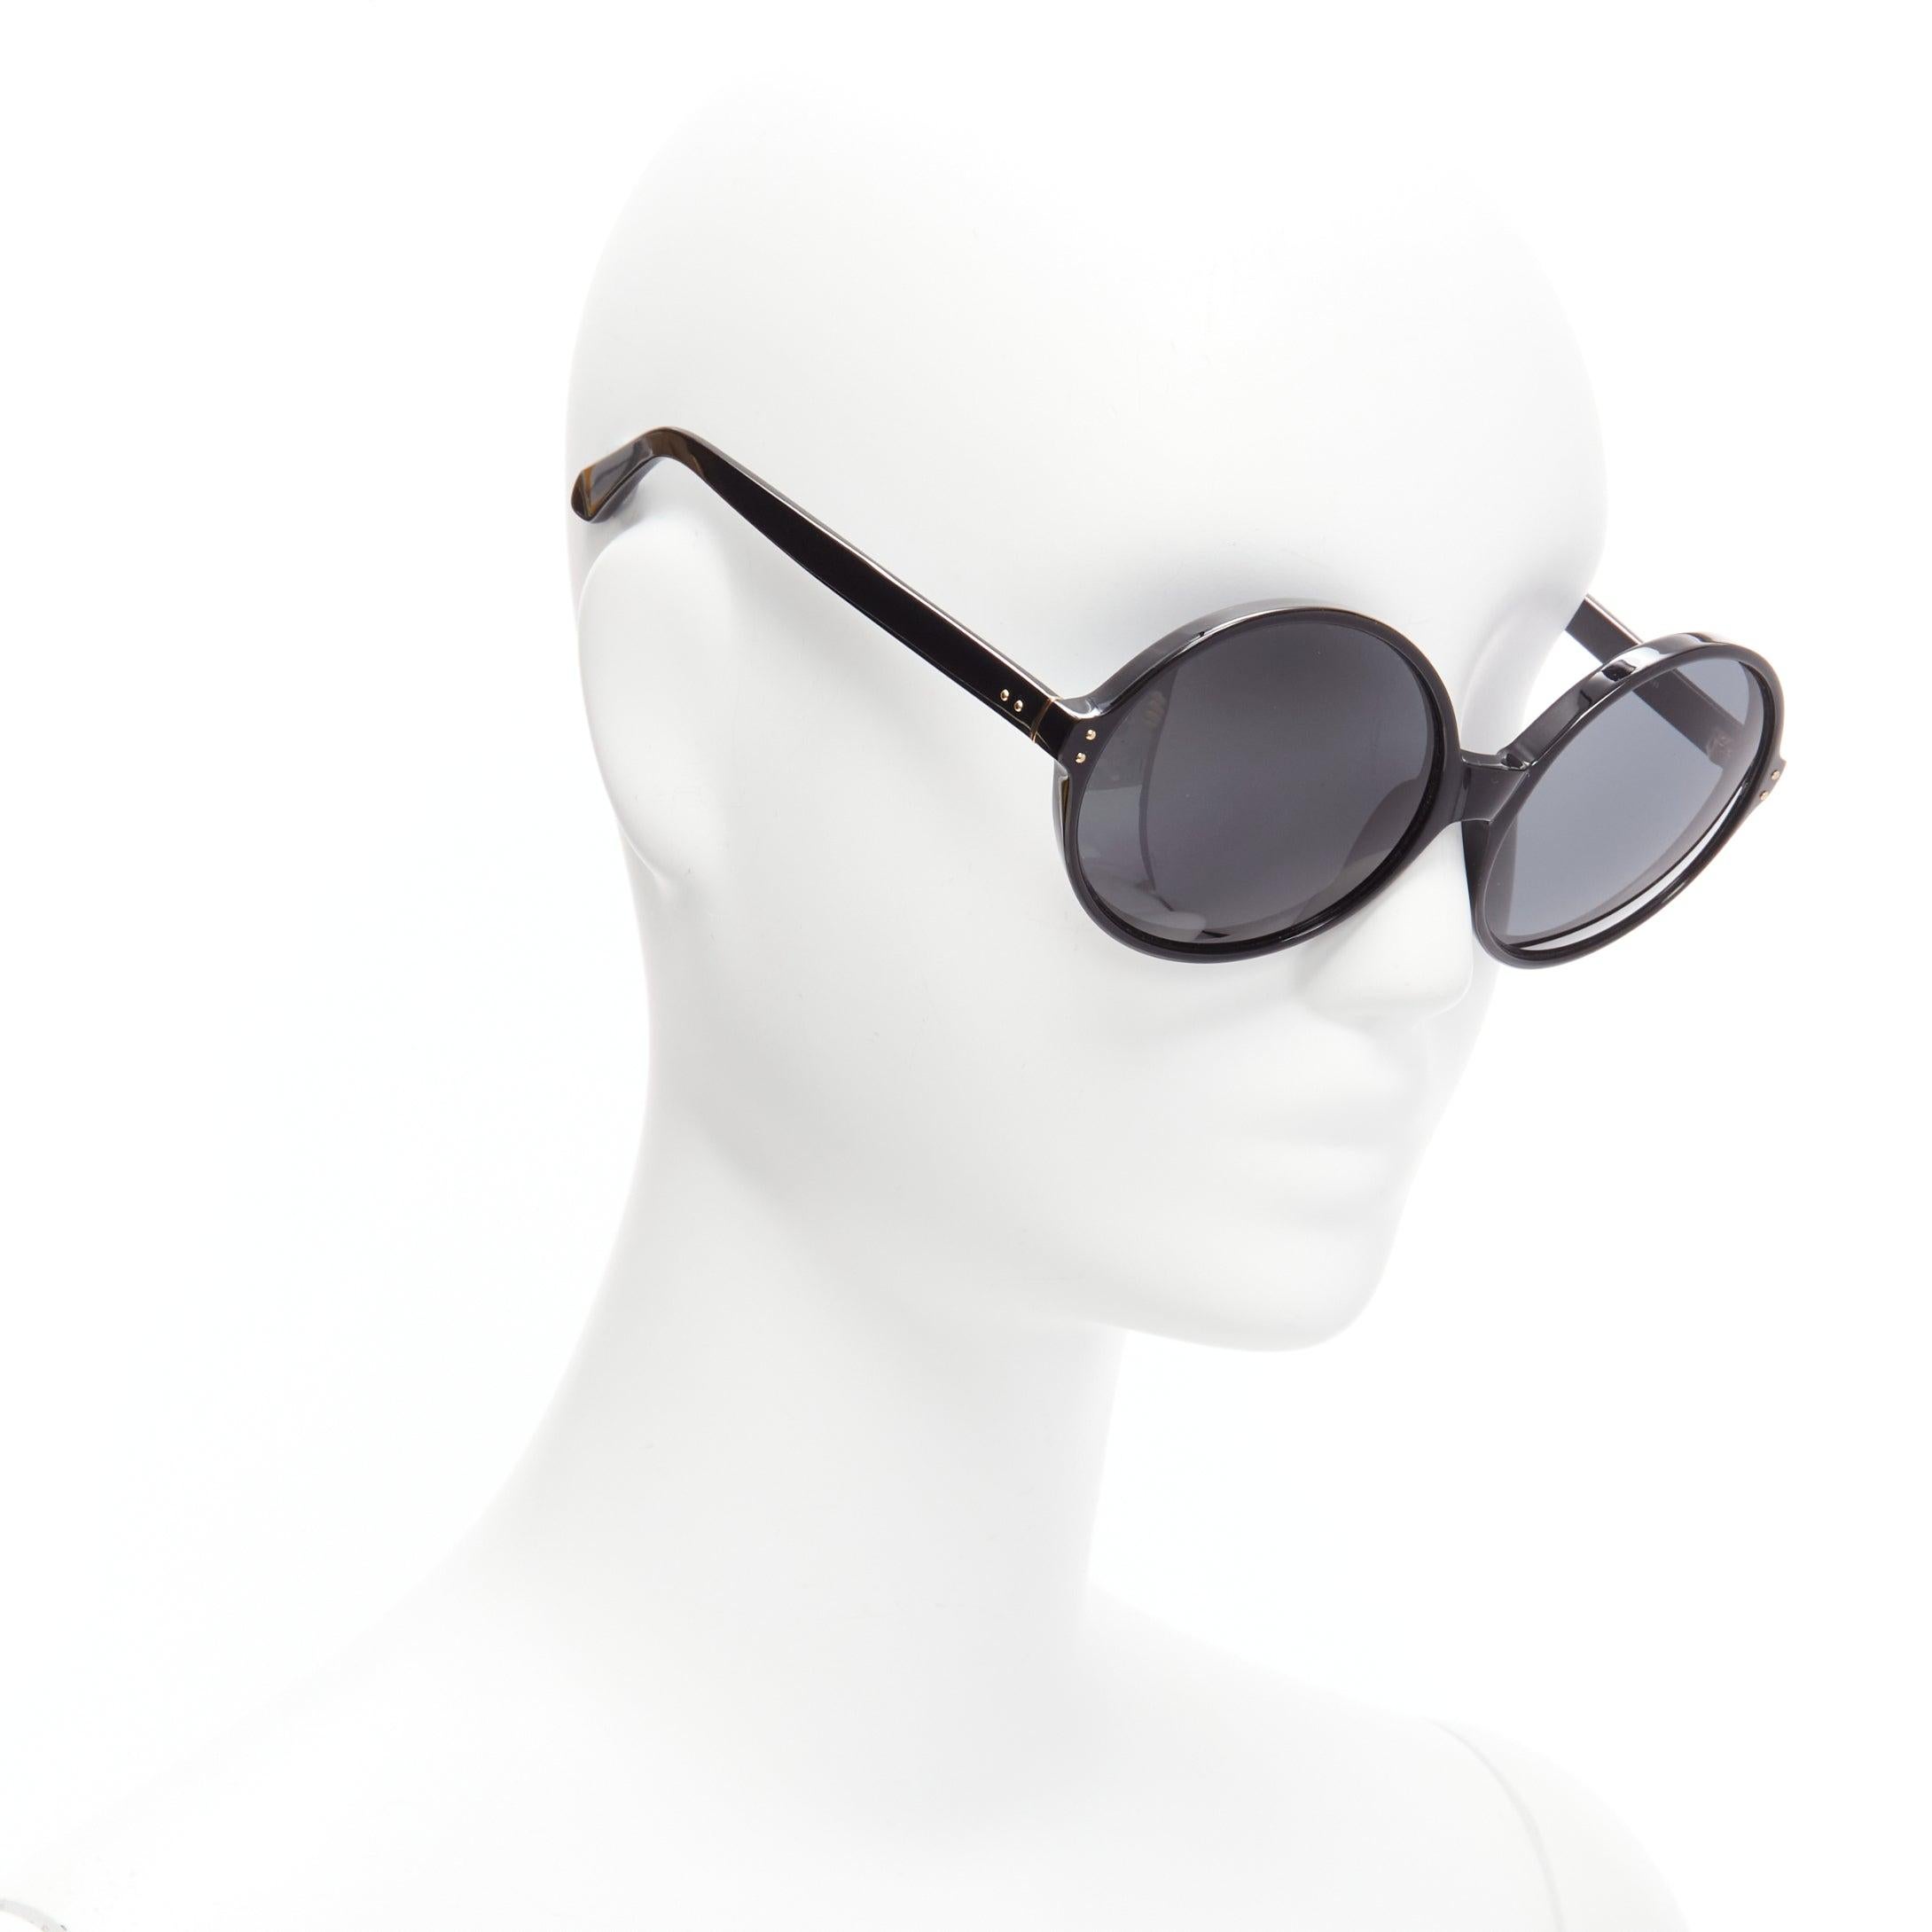 LINDA FARROW LFL671 Cat No.3 black round oversized bug eye sunglasses
Reference: BSHW/A00095
Brand: Linda Farrow
Model: LFL671 Cat No.3
Material: Acrylic
Color: Black
Pattern: Solid
Lining: Black Acetate
Extra Details: Side mini gold studs.
Made in: